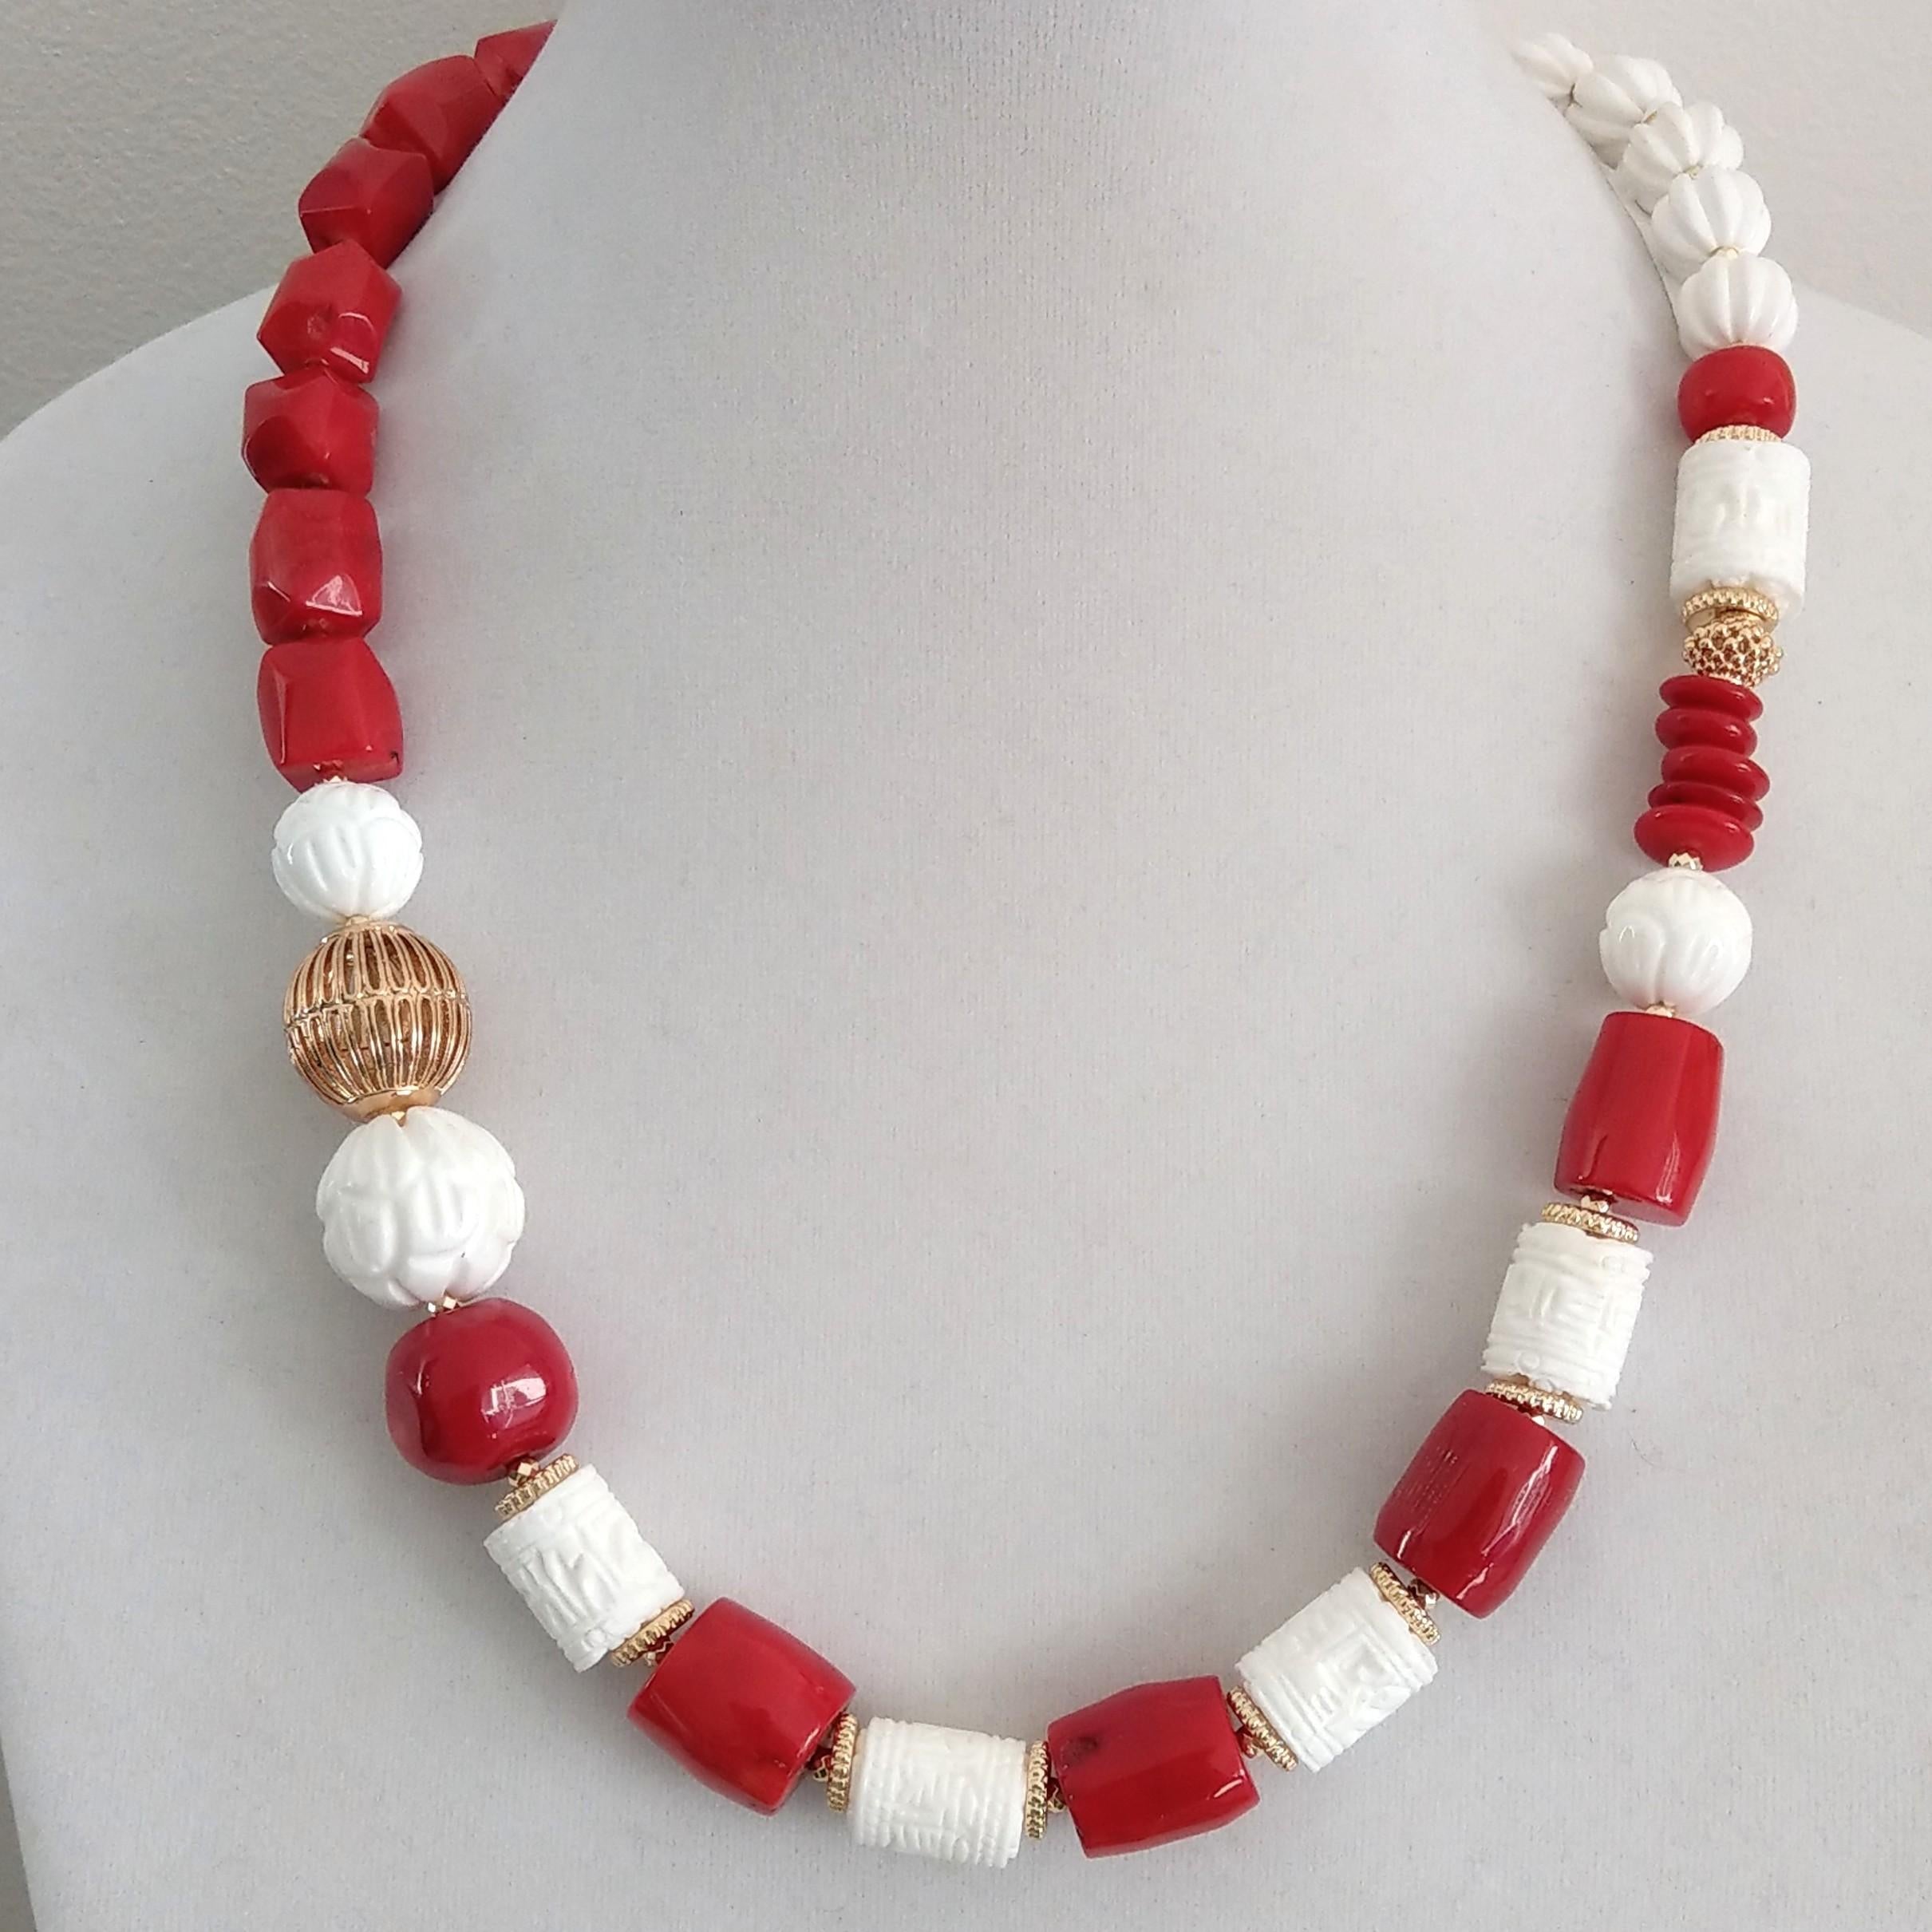 Fit for Summer this statement Red Sea Bamboo Coral and Carved Giant Clam shell beads Necklace can be worn day or night.
necklace features a 18mm, 14mm, 12mm and 15x12mm tube beads carved Giant Clam Shell
Red Sea Bamboo Coral beads 17mm,  12x12mm and